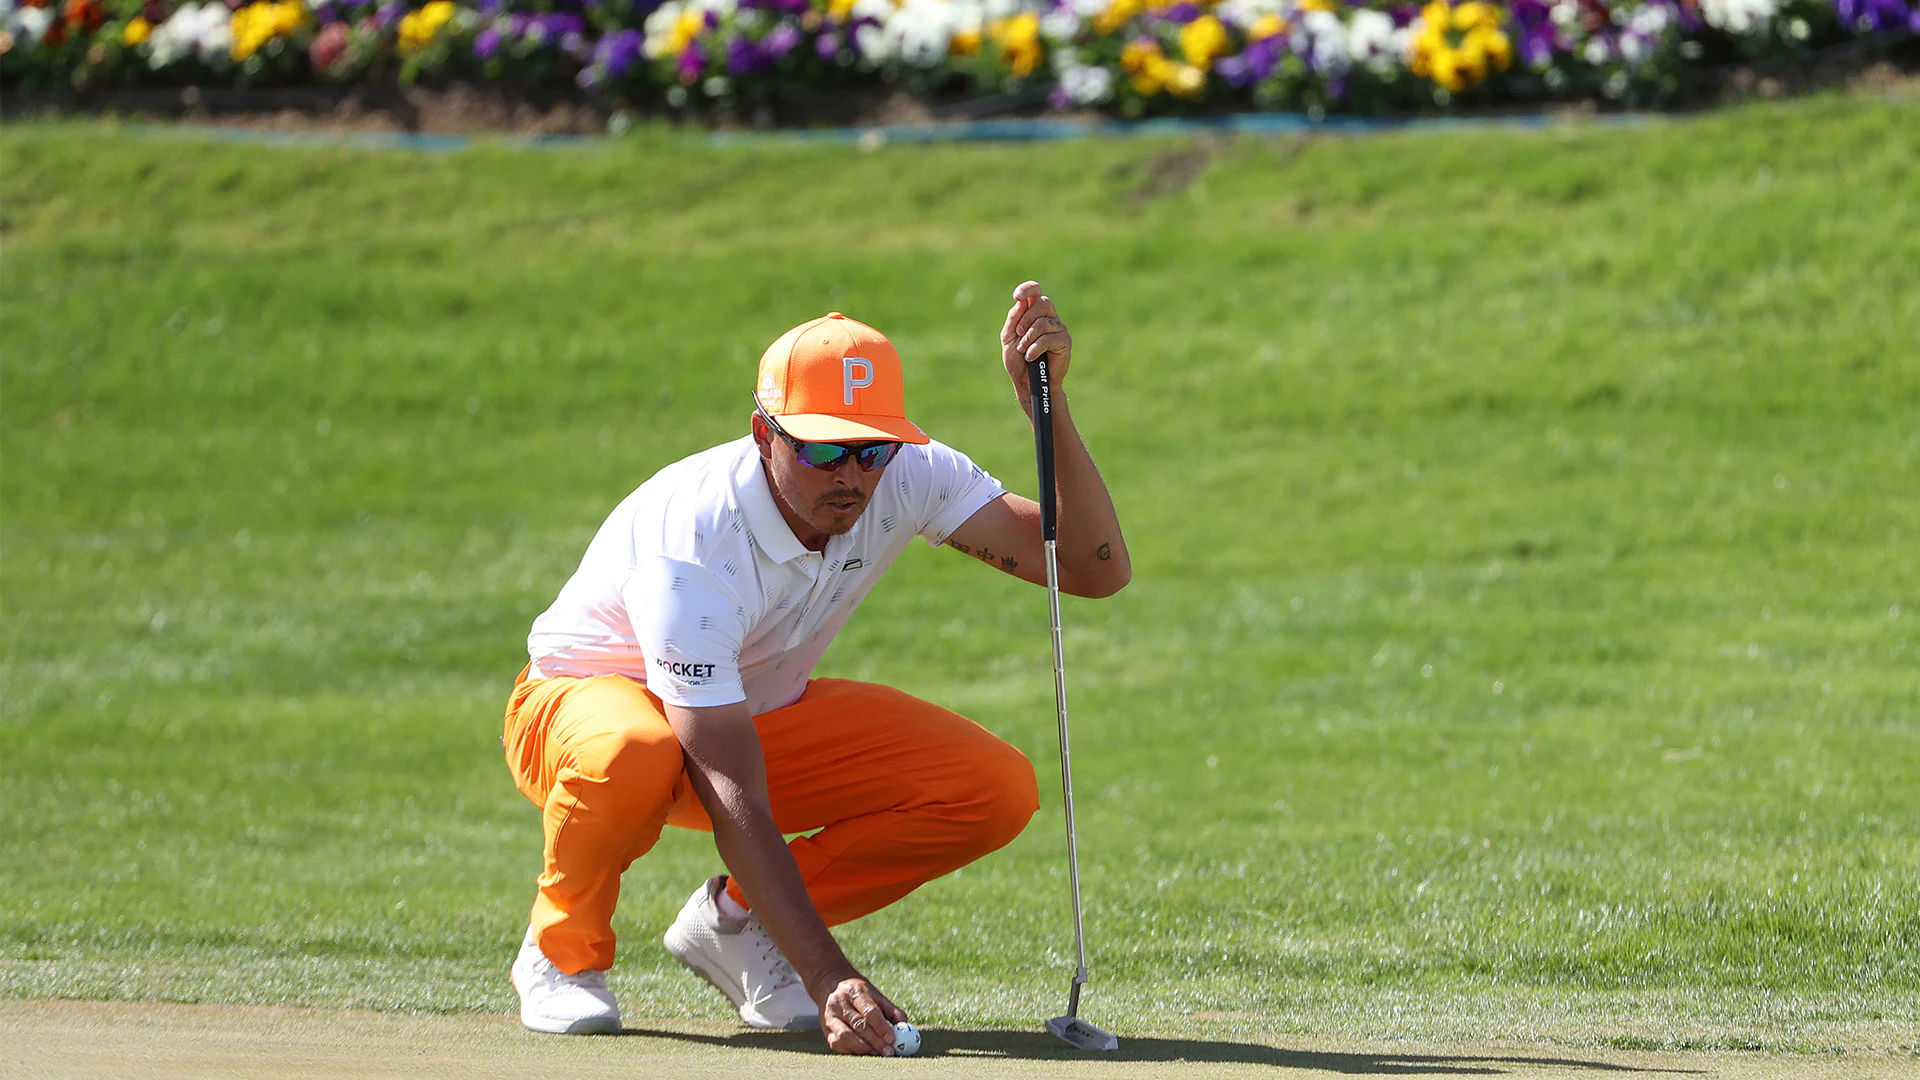 CJ Cup ‘a big step in the right direction’ for Rickie Fowler after T-3 finish